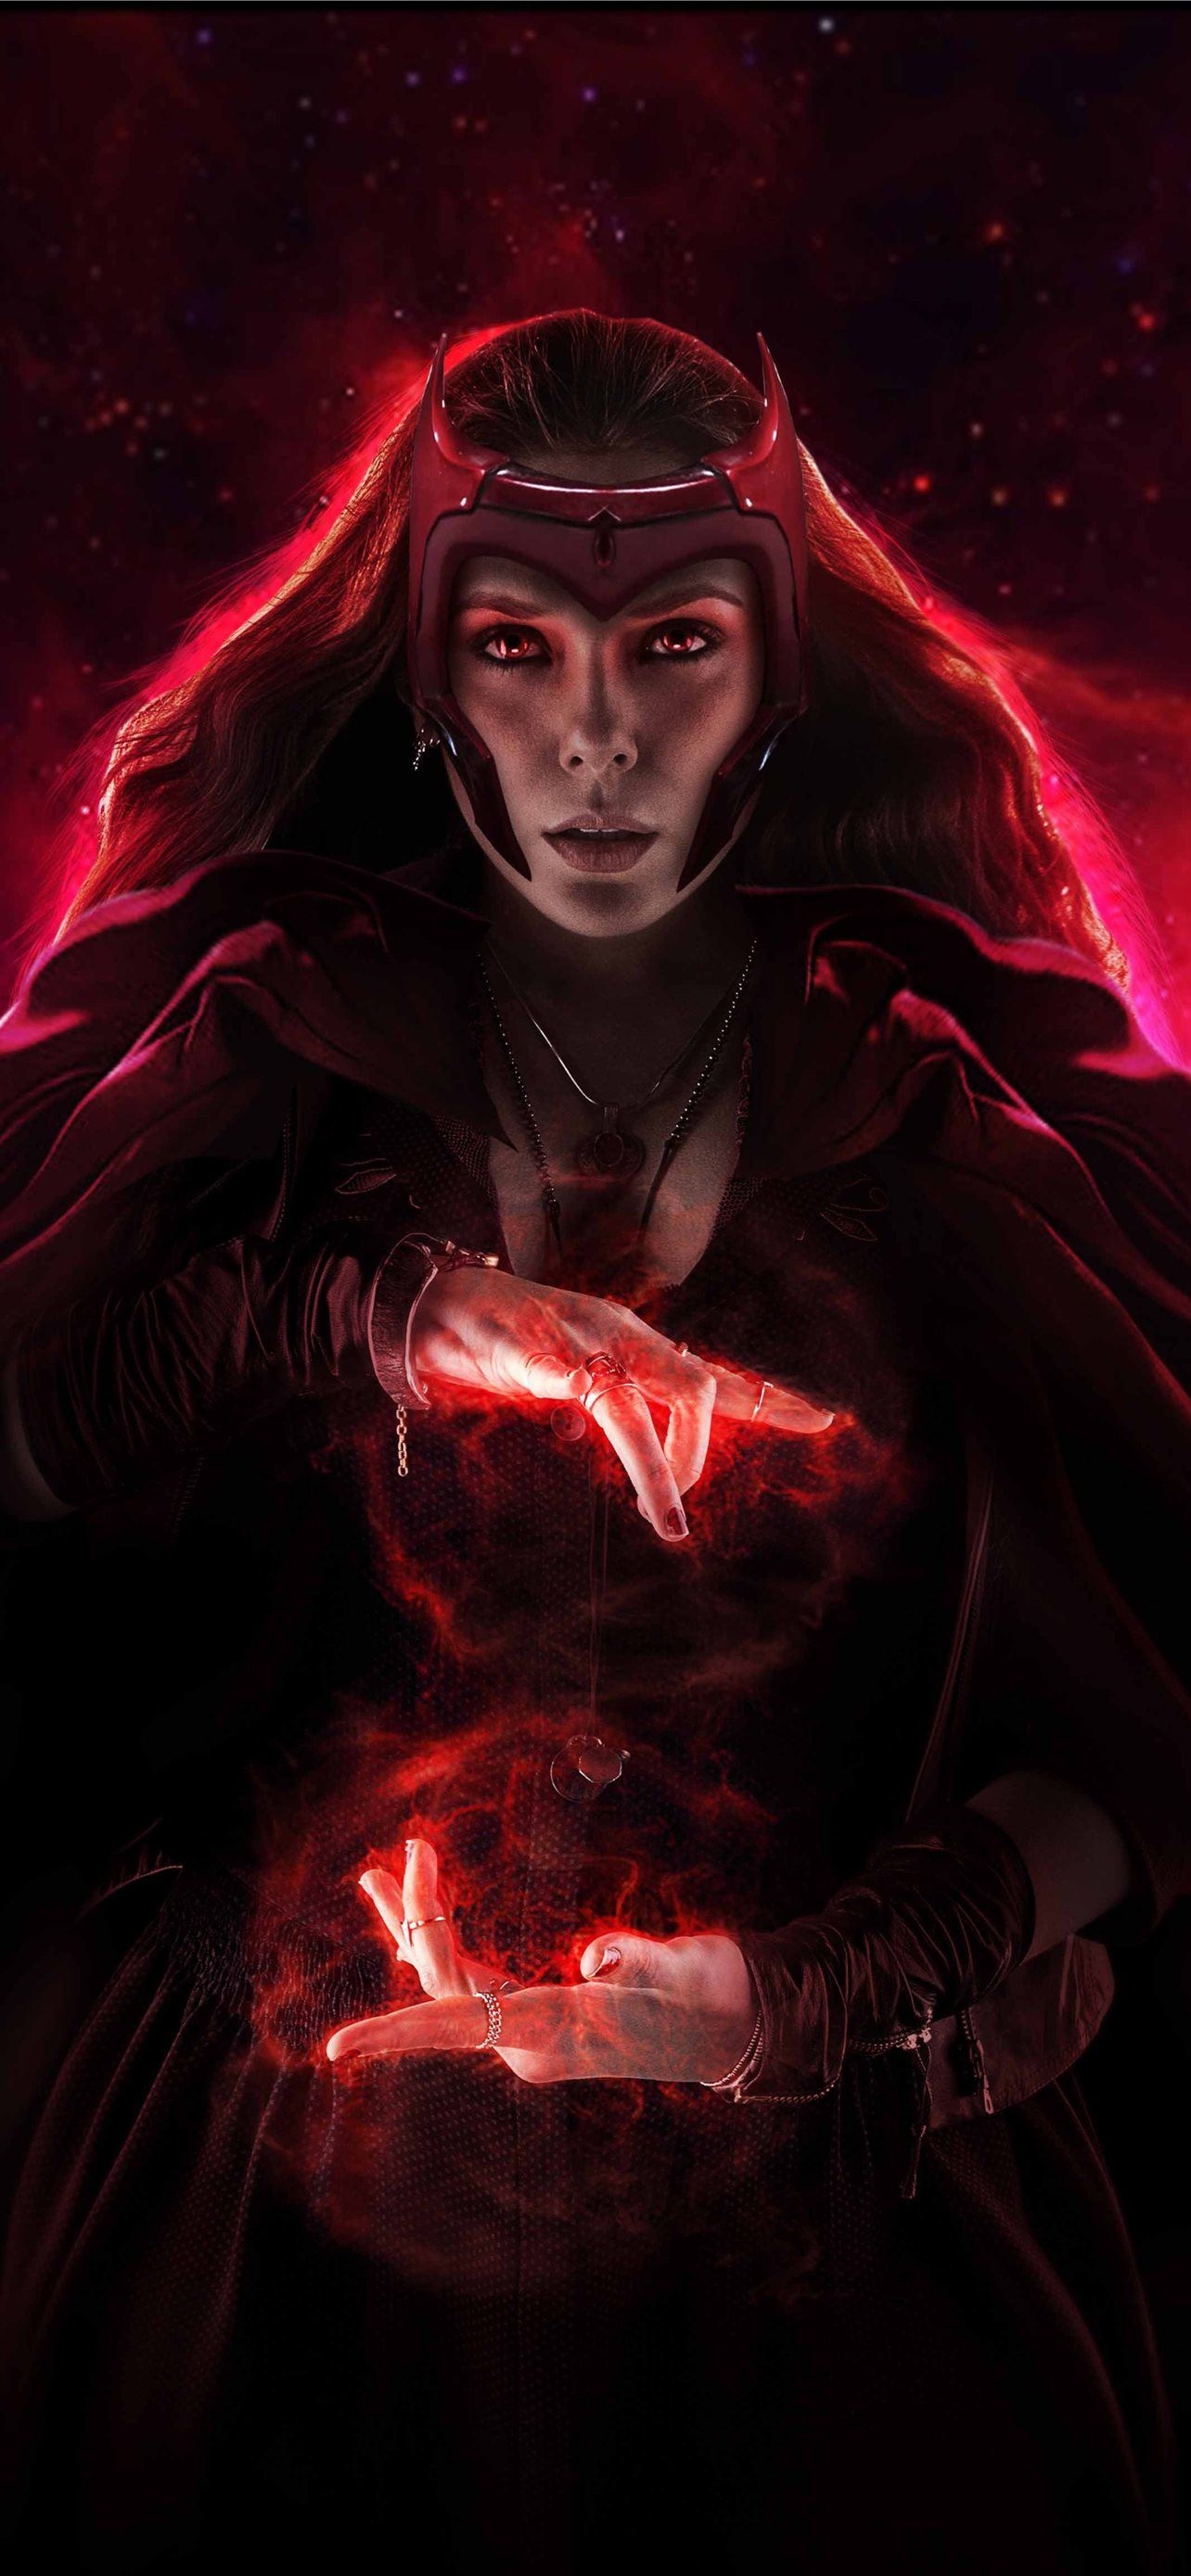 Scarlet Witch, Best Scarlet Witch wallpapers, HD quality, Downloadable images, 1290x2780 HD Handy